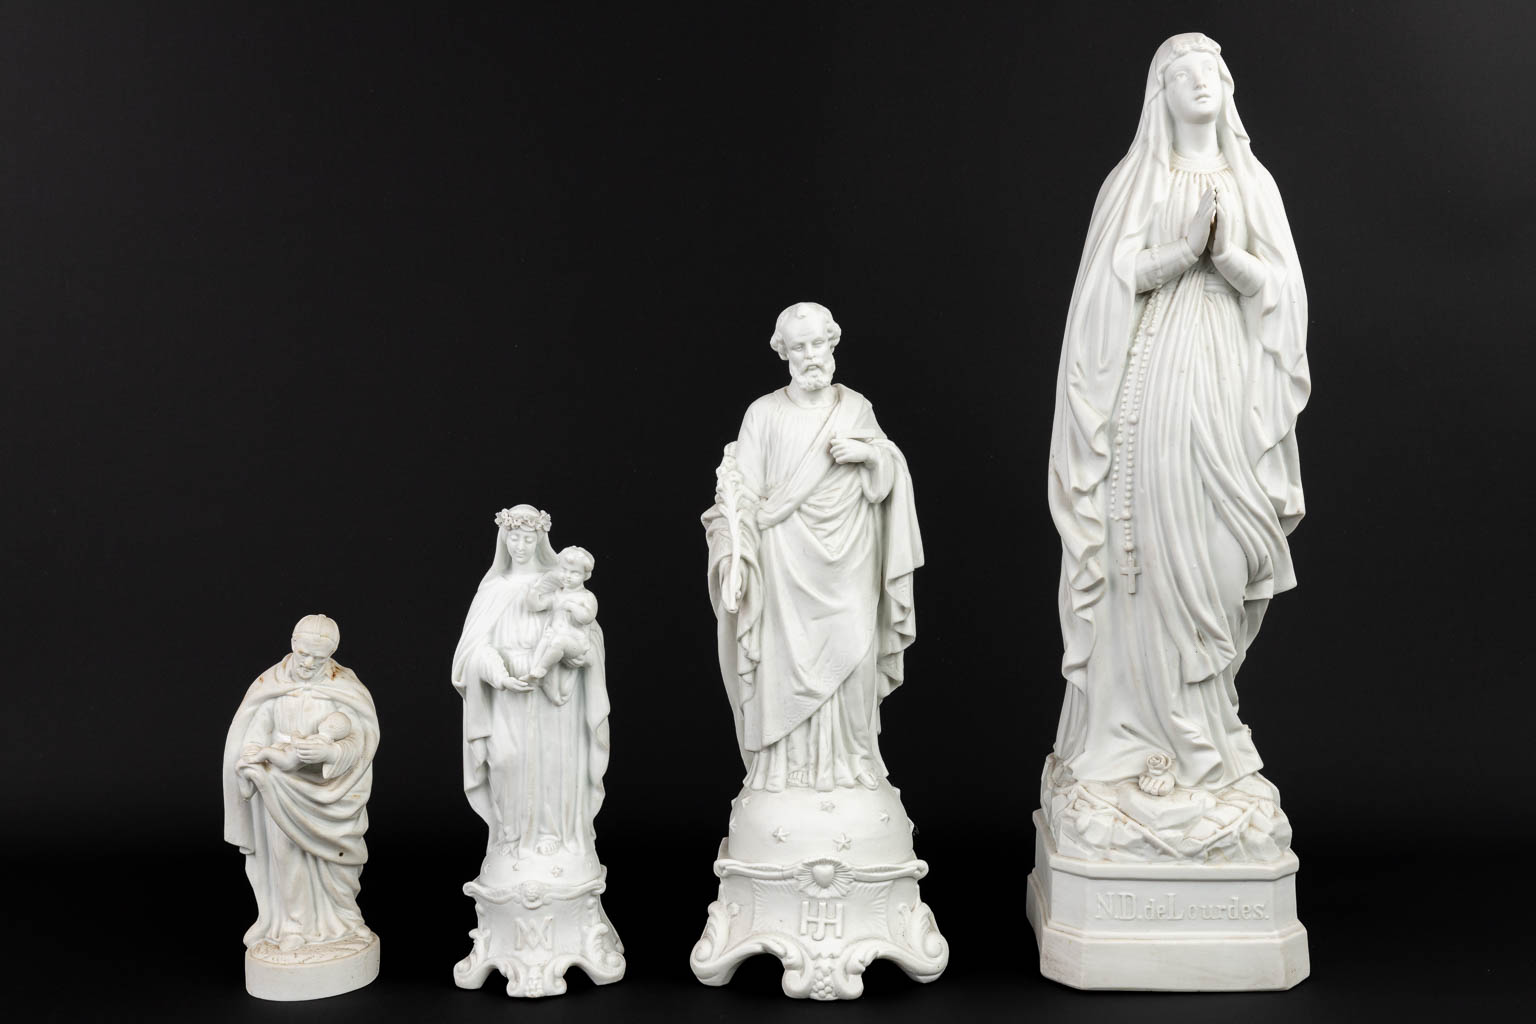 A collection of 4 biscuit porcelain statues of holy figurines. (H:52,5cm)